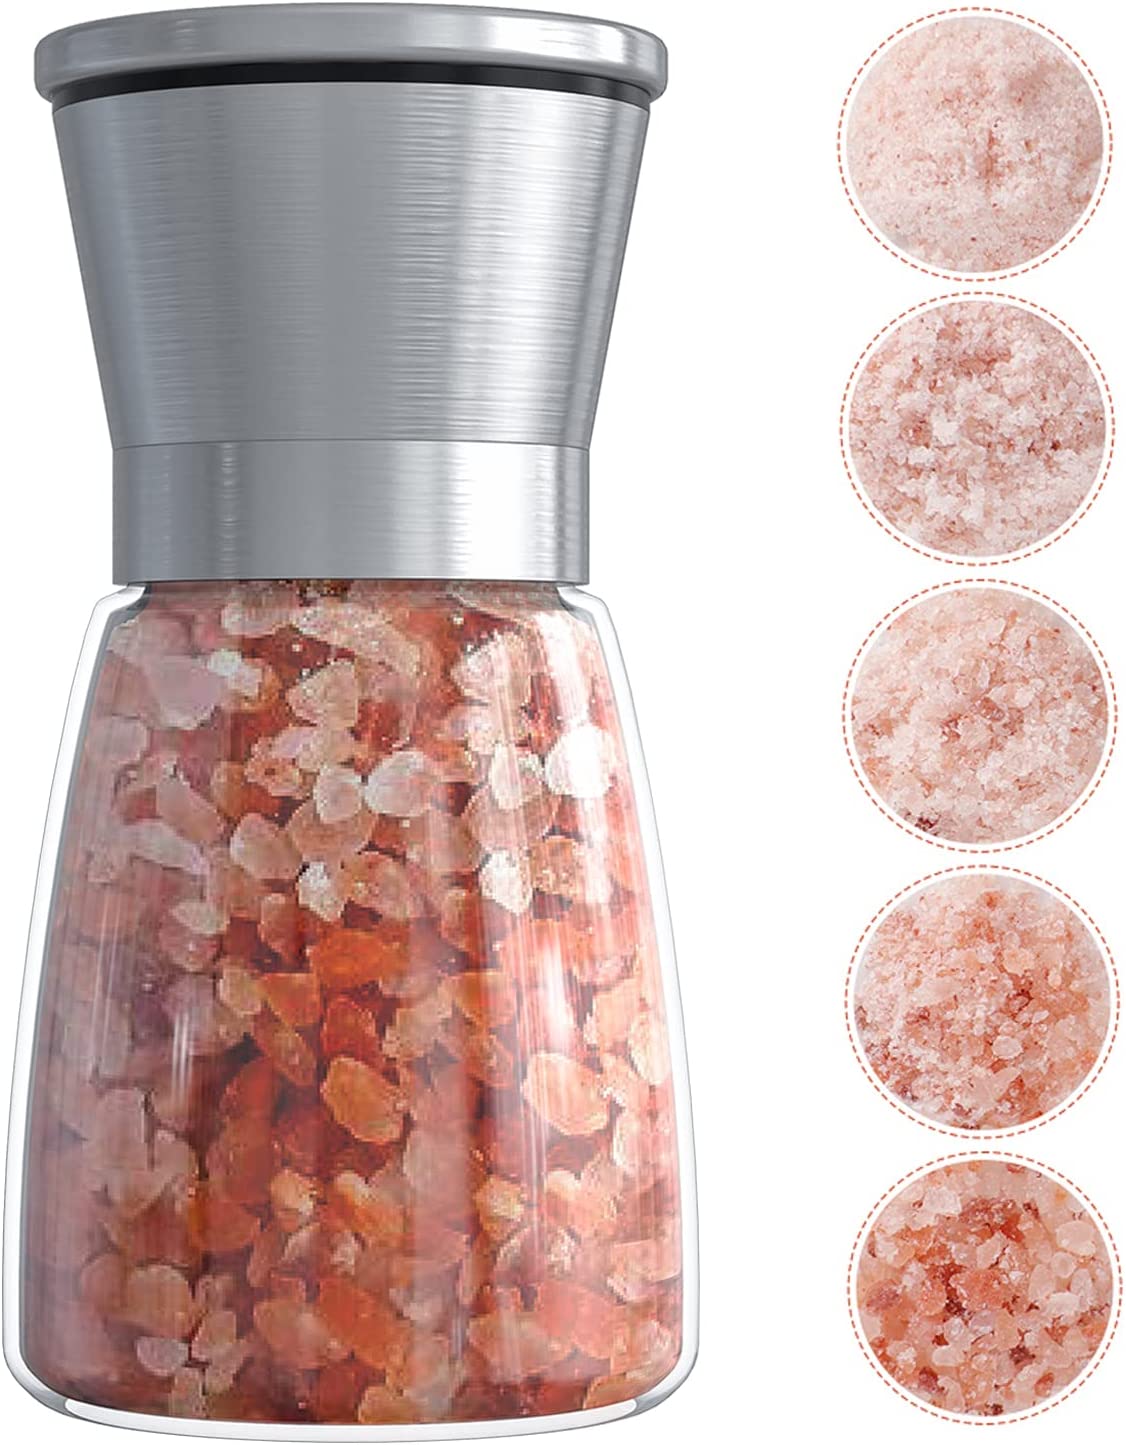 Ebaco Original Stainless Steel Salt or Pepper Grinder - Top Spice Mill with Ceramic Blades, Brushed Stainless Steel and Adjustable Coarseness (Single Package） $6.78